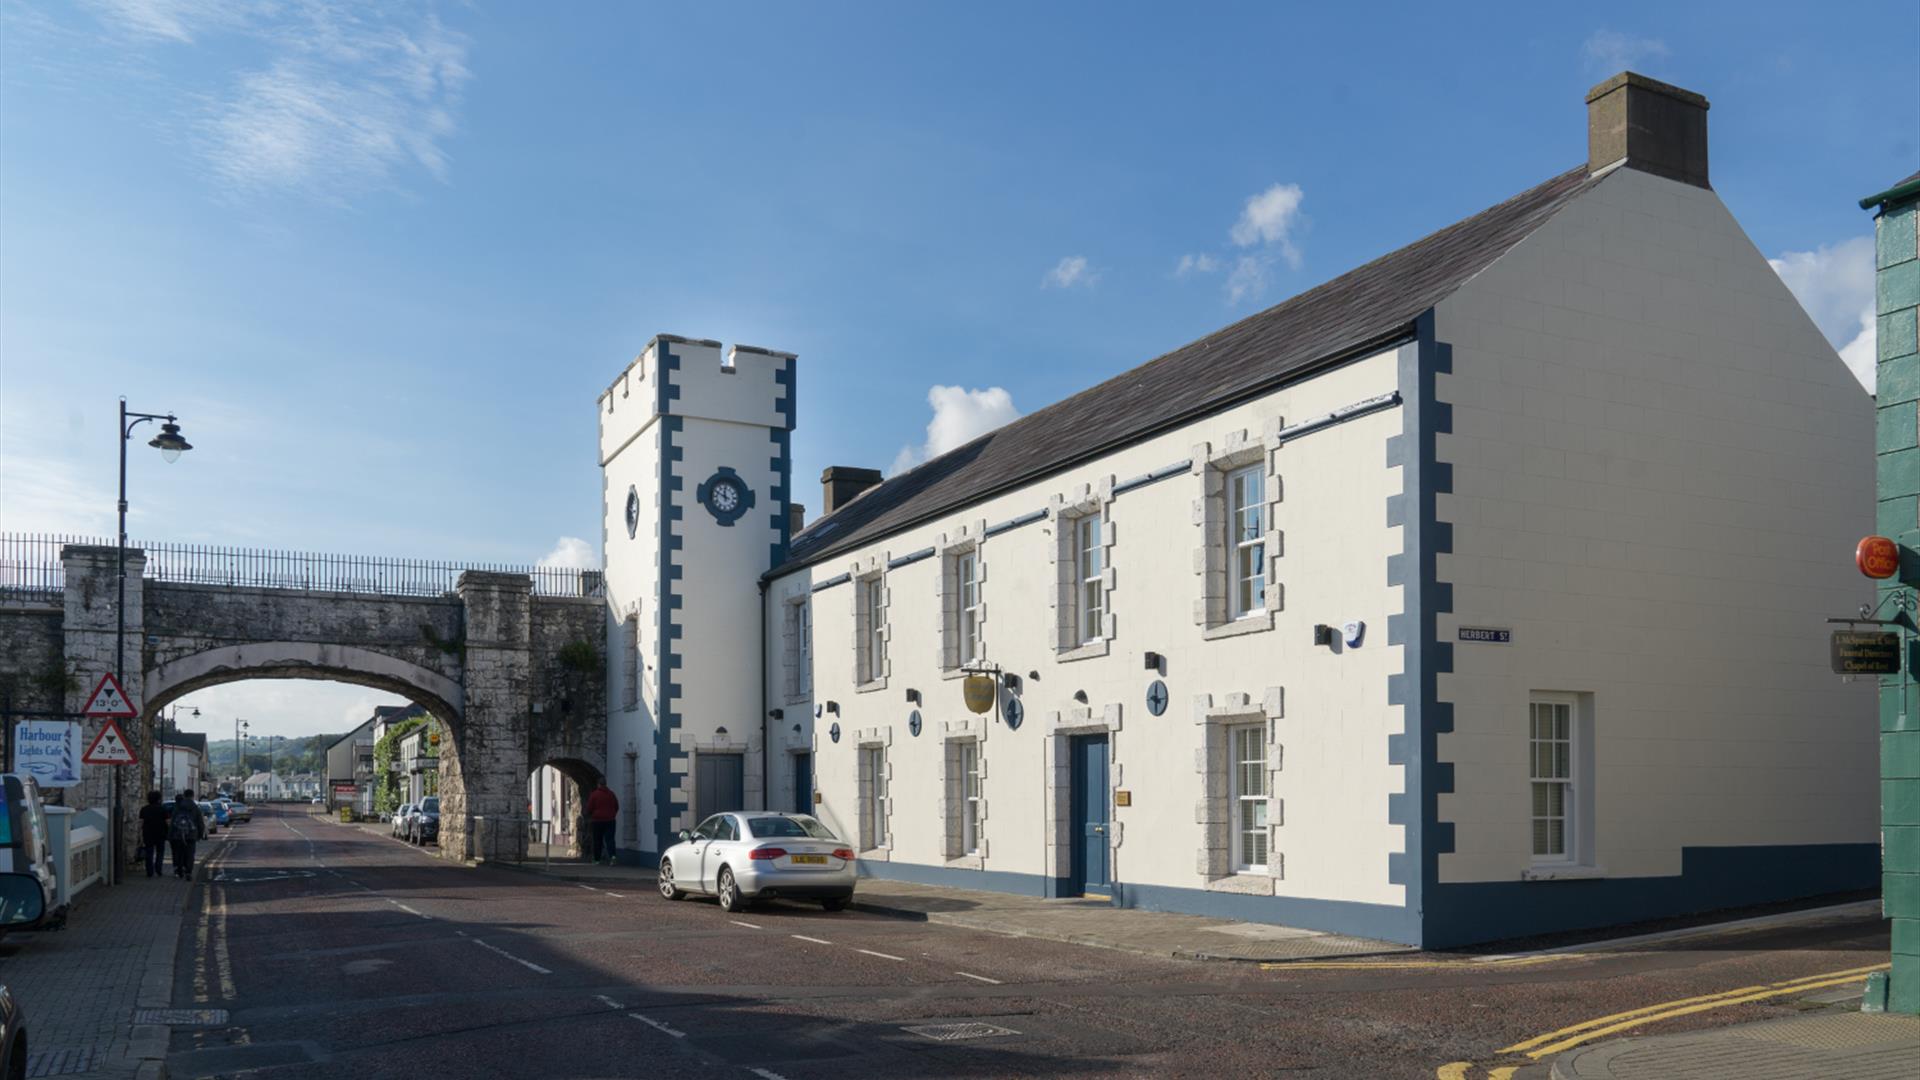 Meetings at The Heritage Hub at Carnlough Town Hall